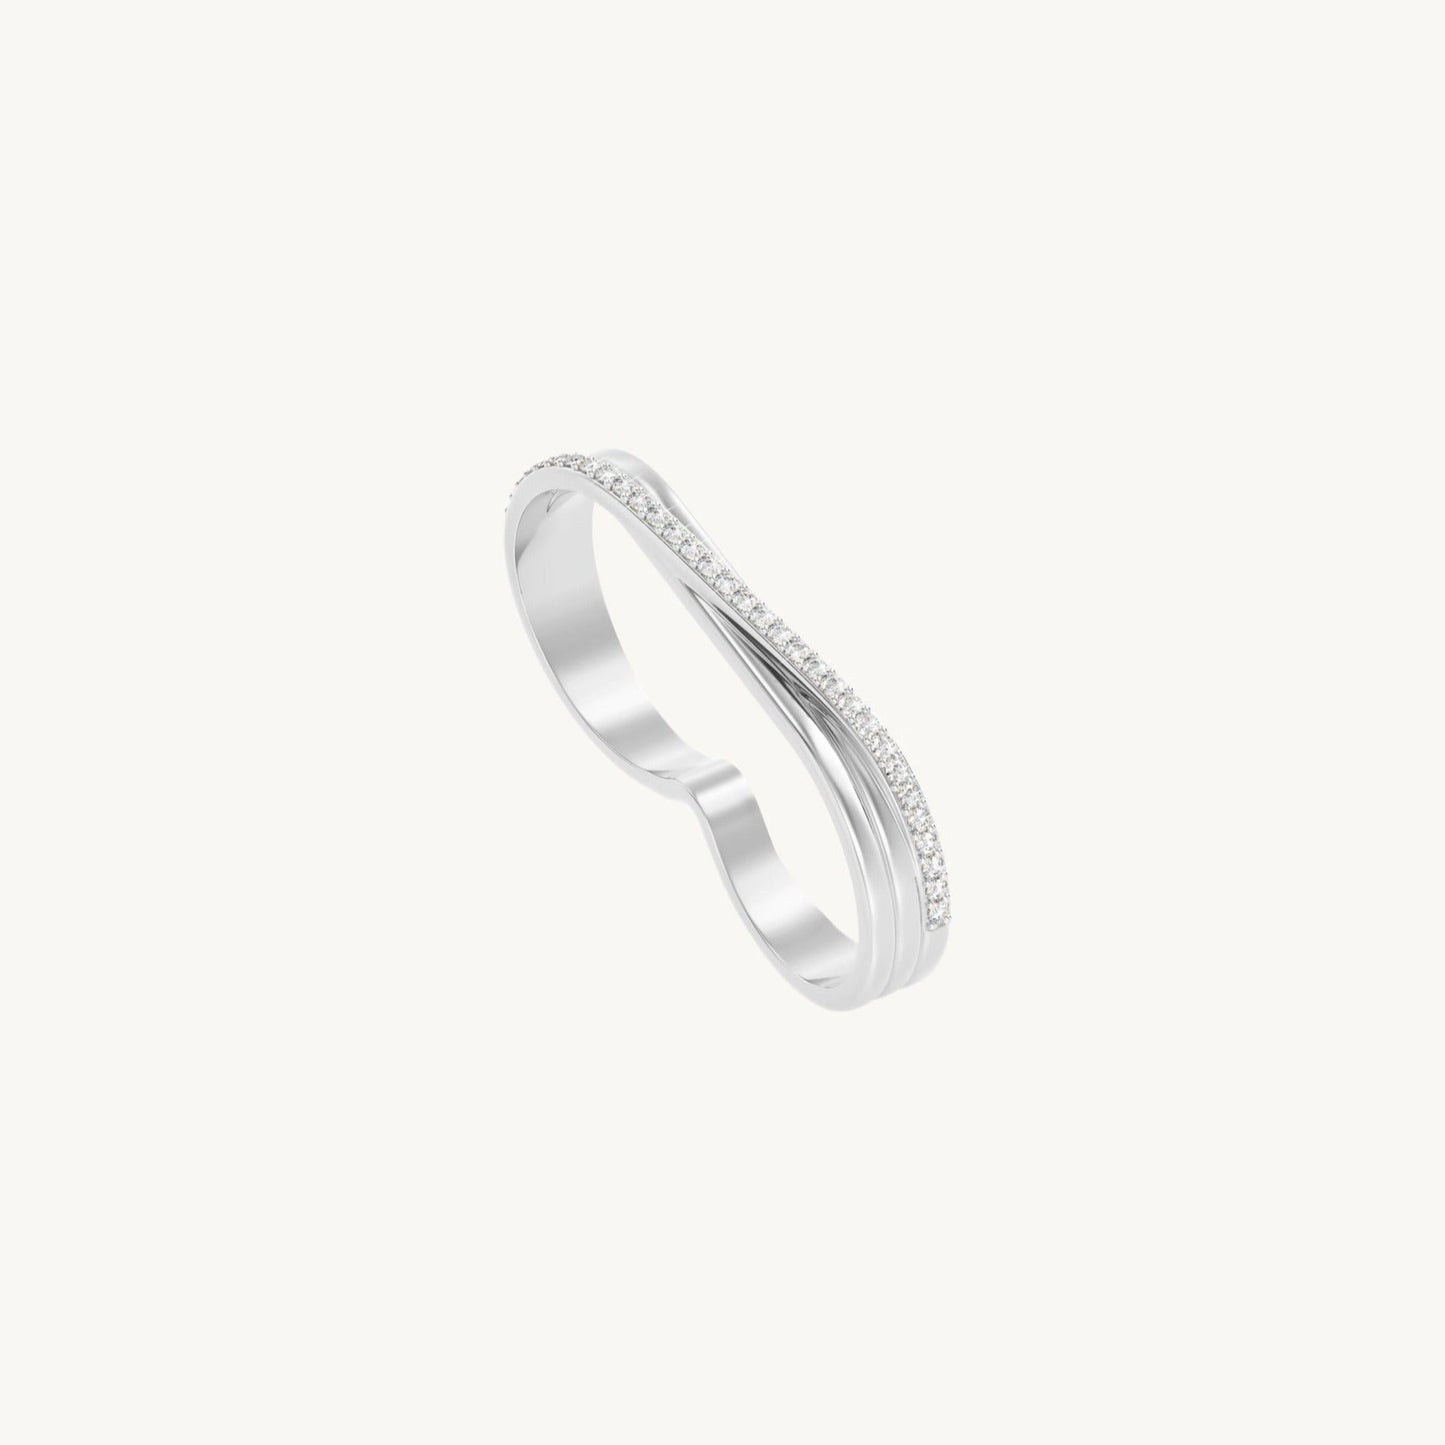 Layla double ring - silver